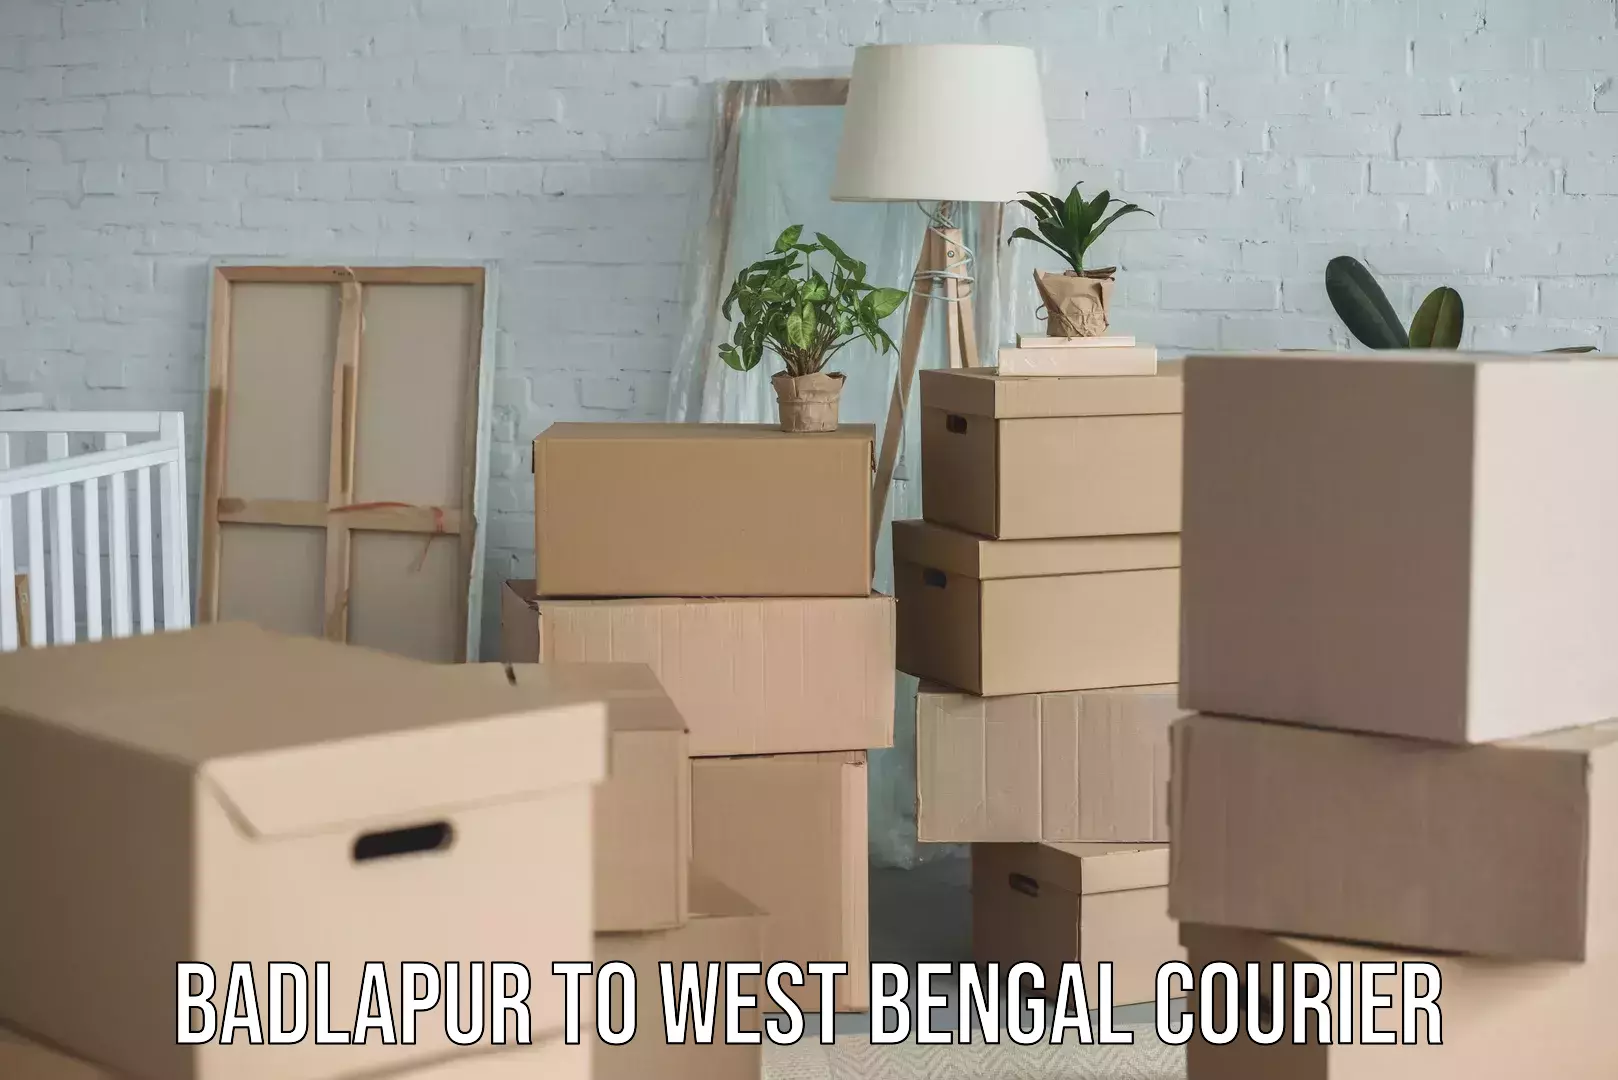 24/7 courier service Badlapur to West Bengal